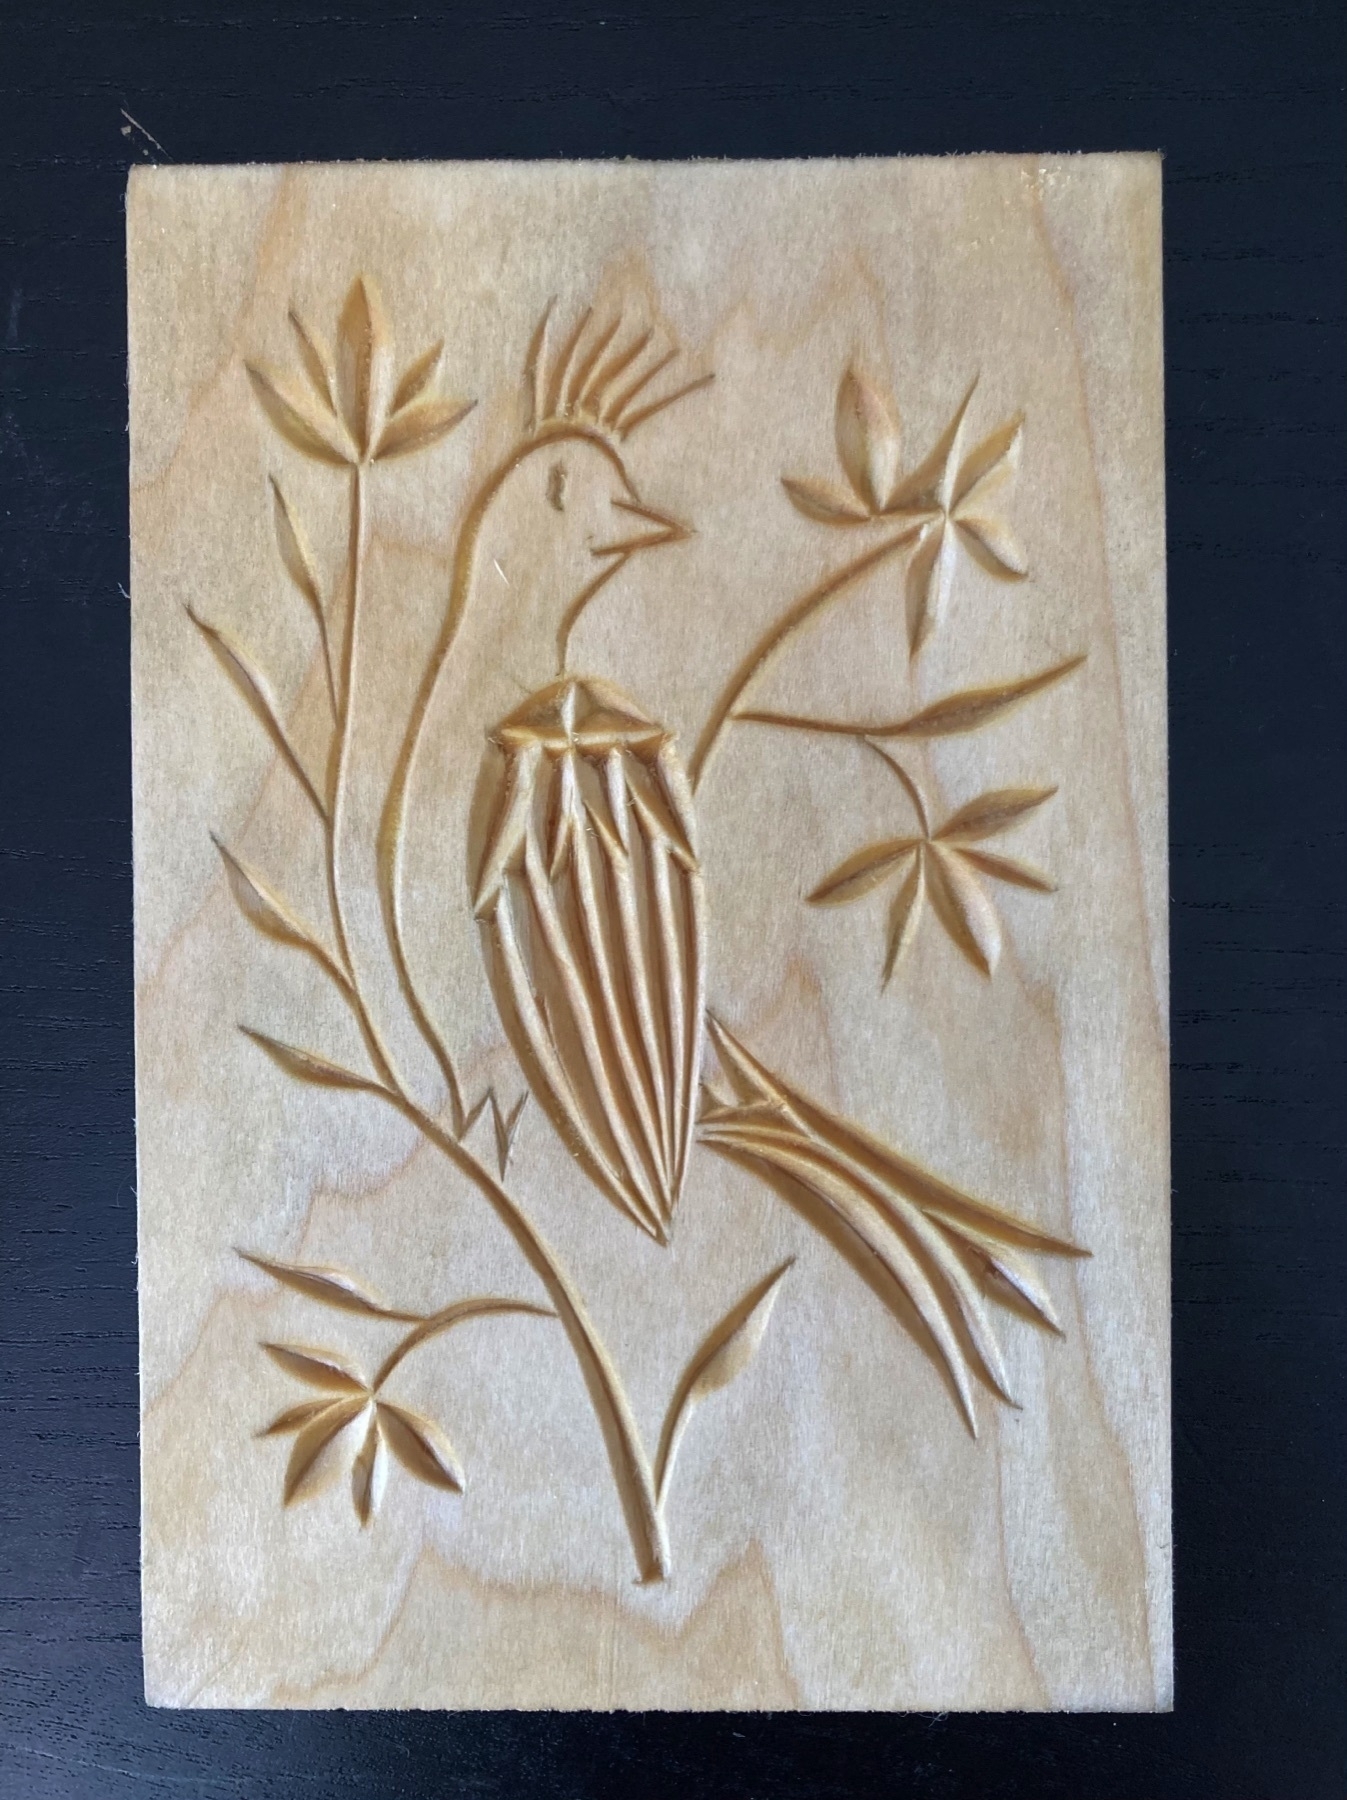 carving made from the sketch